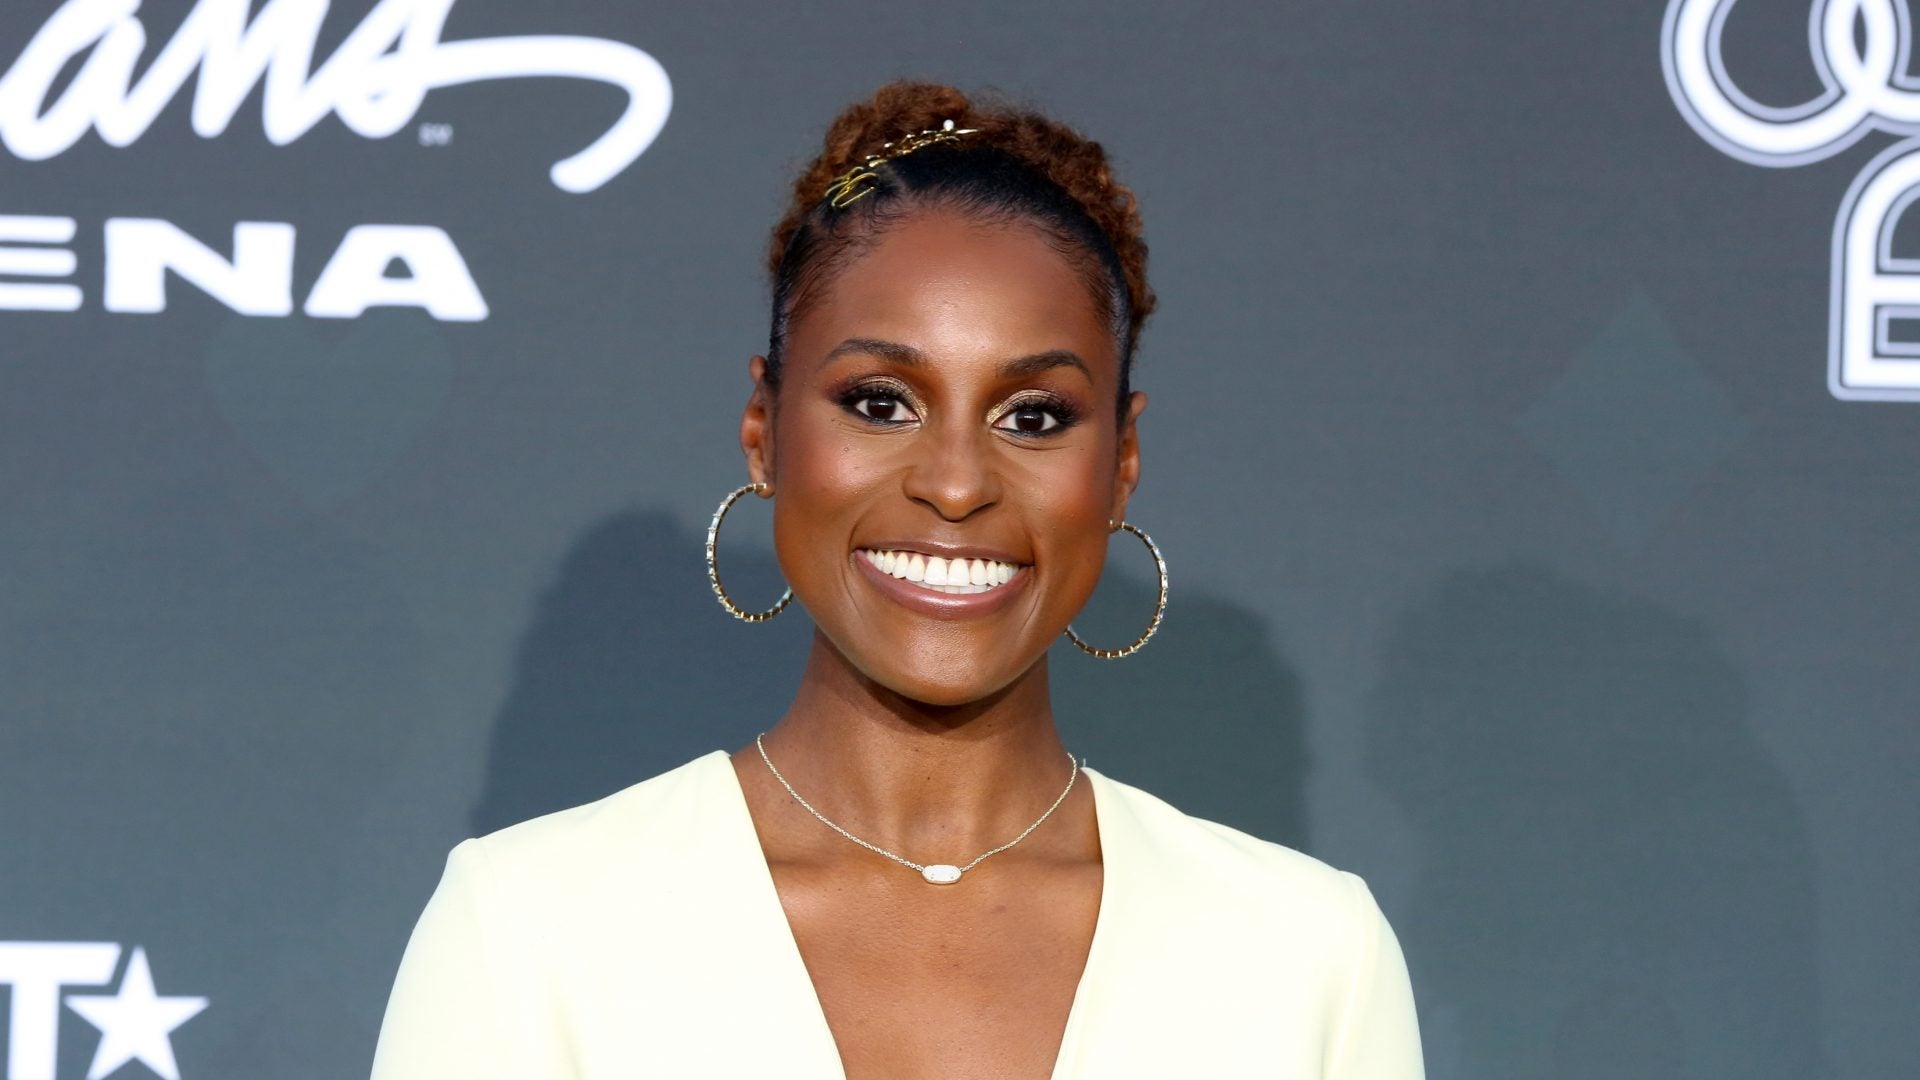 Issa Rae Highlighted The Lack Of Women In This Year’s Oscar Nominees For Best Director: 'Congrats To Those Men'